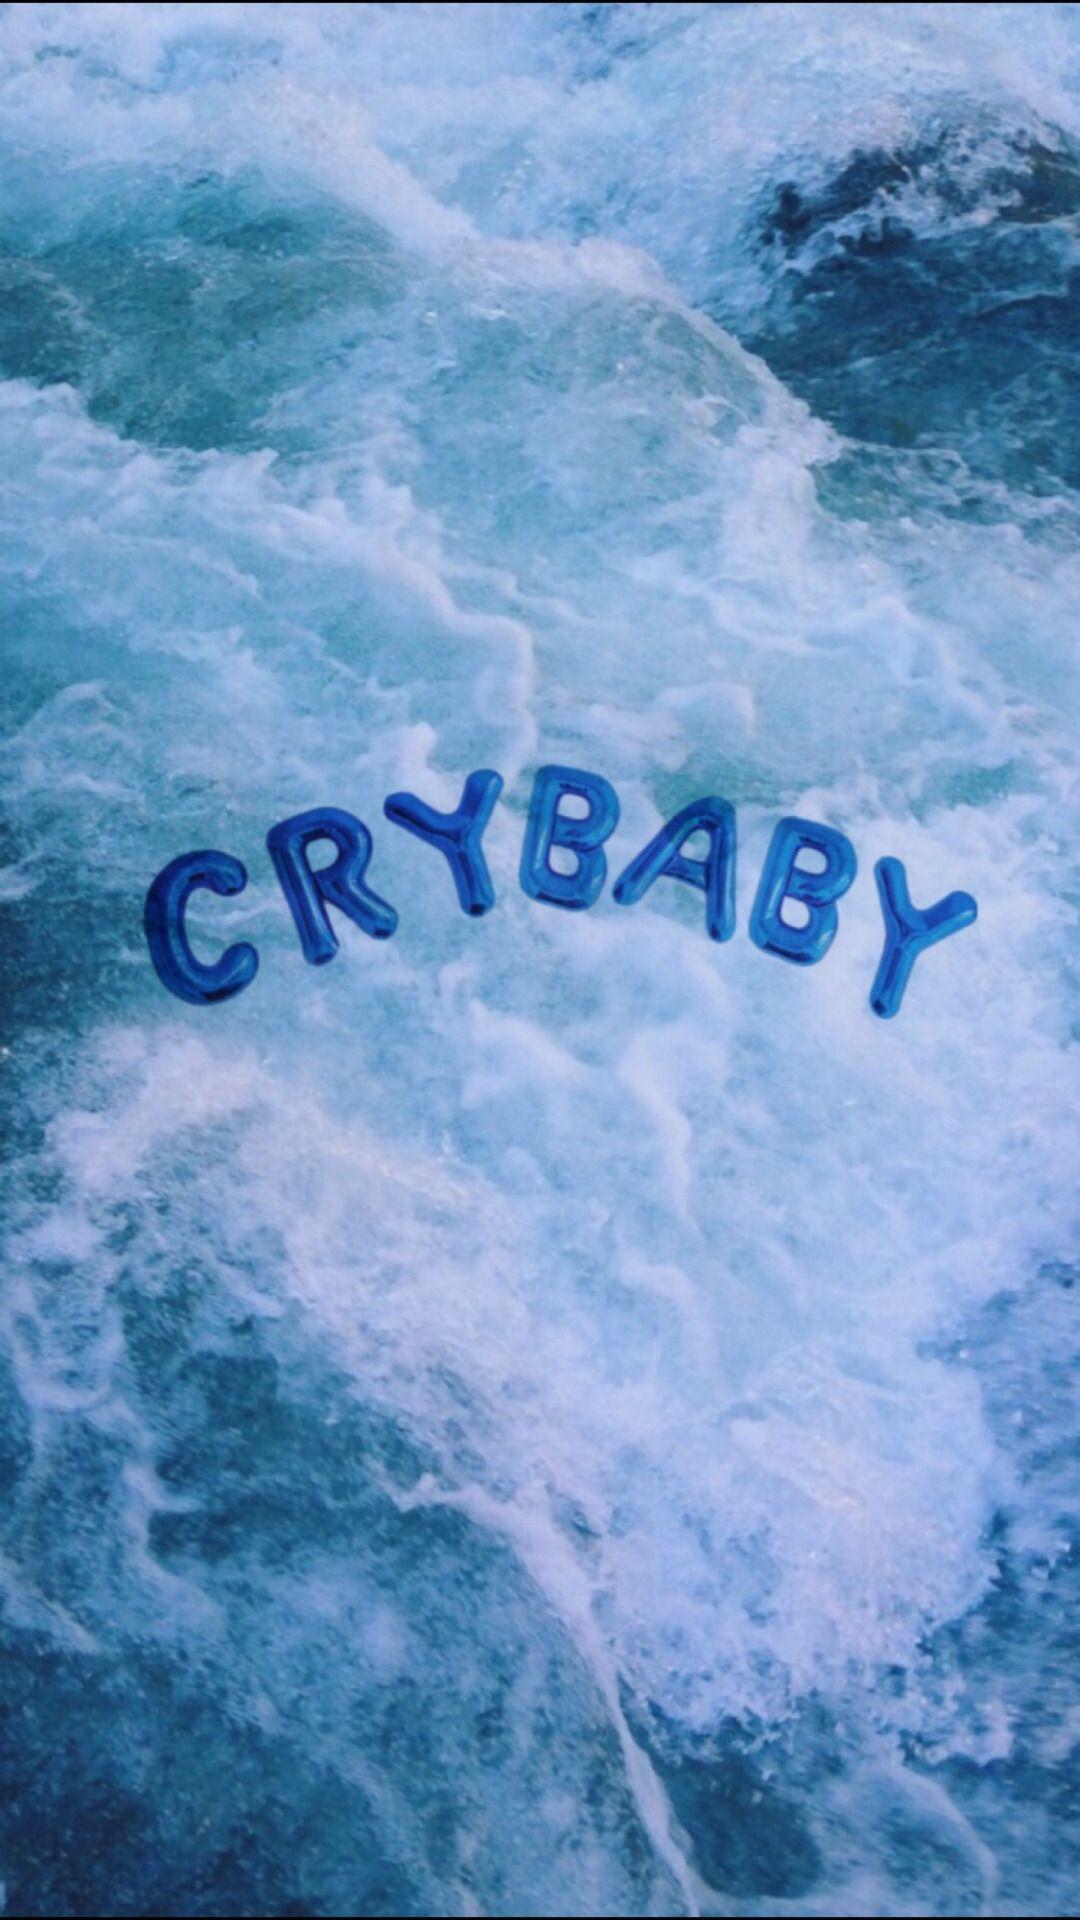 ☺hipster Tumblr Iphone Wallpaper 309. Crybaby